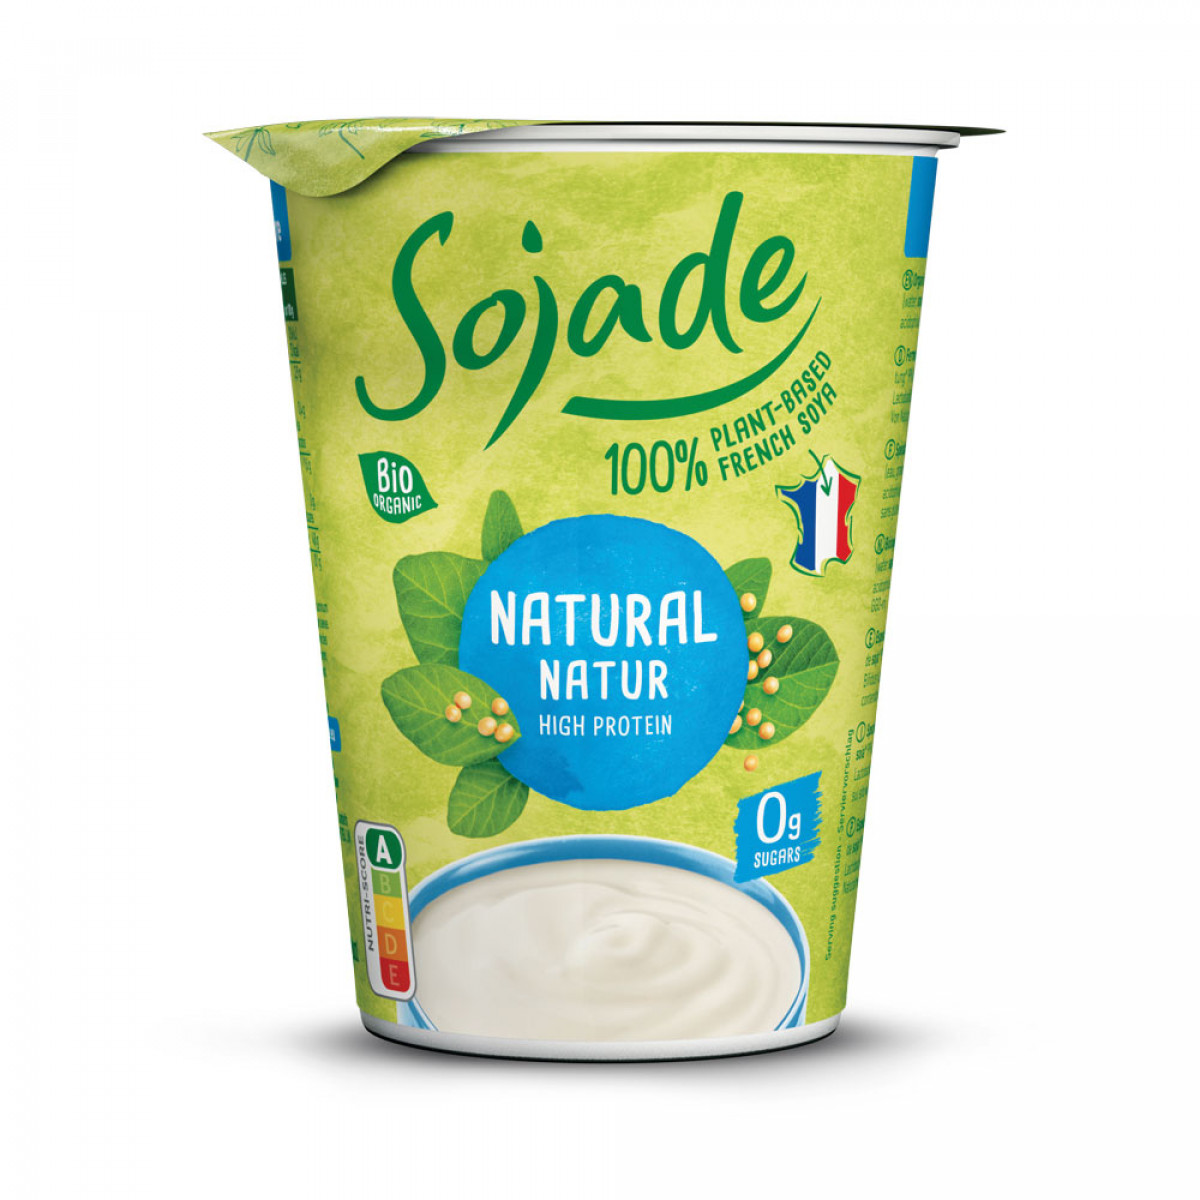 Product picture for Soya Yogurt - Natural